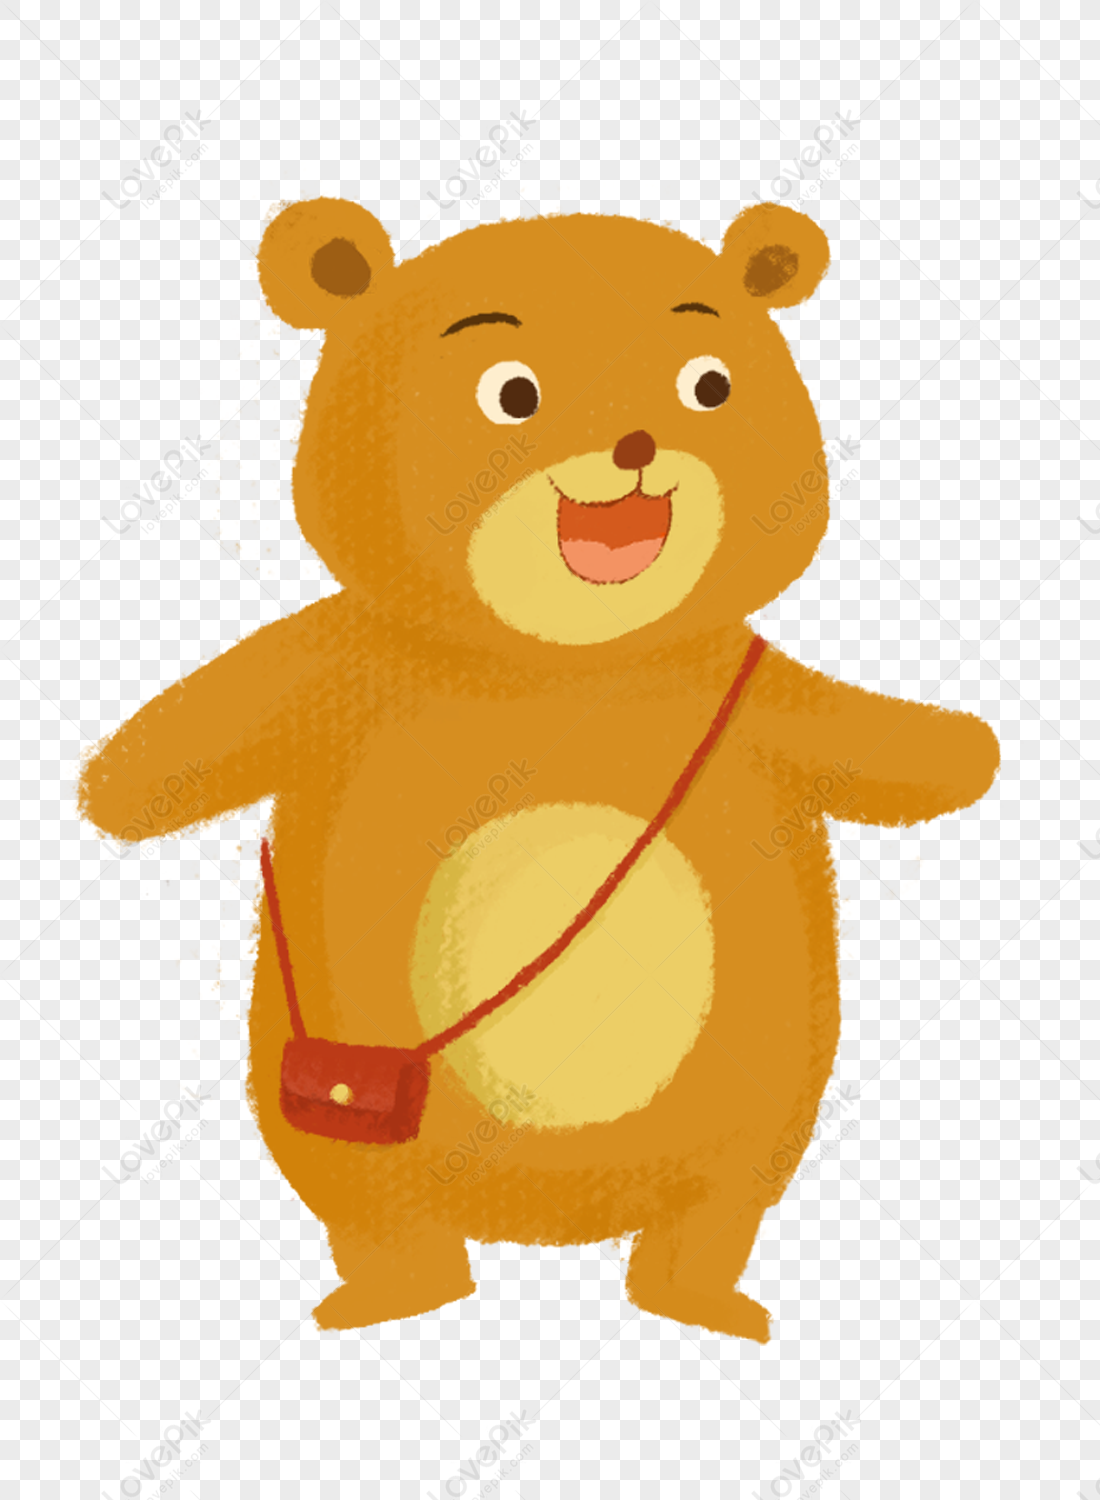 Cartoon Bear PNG Transparent Image And Clipart Image For Free Download -  Lovepik | 400197197